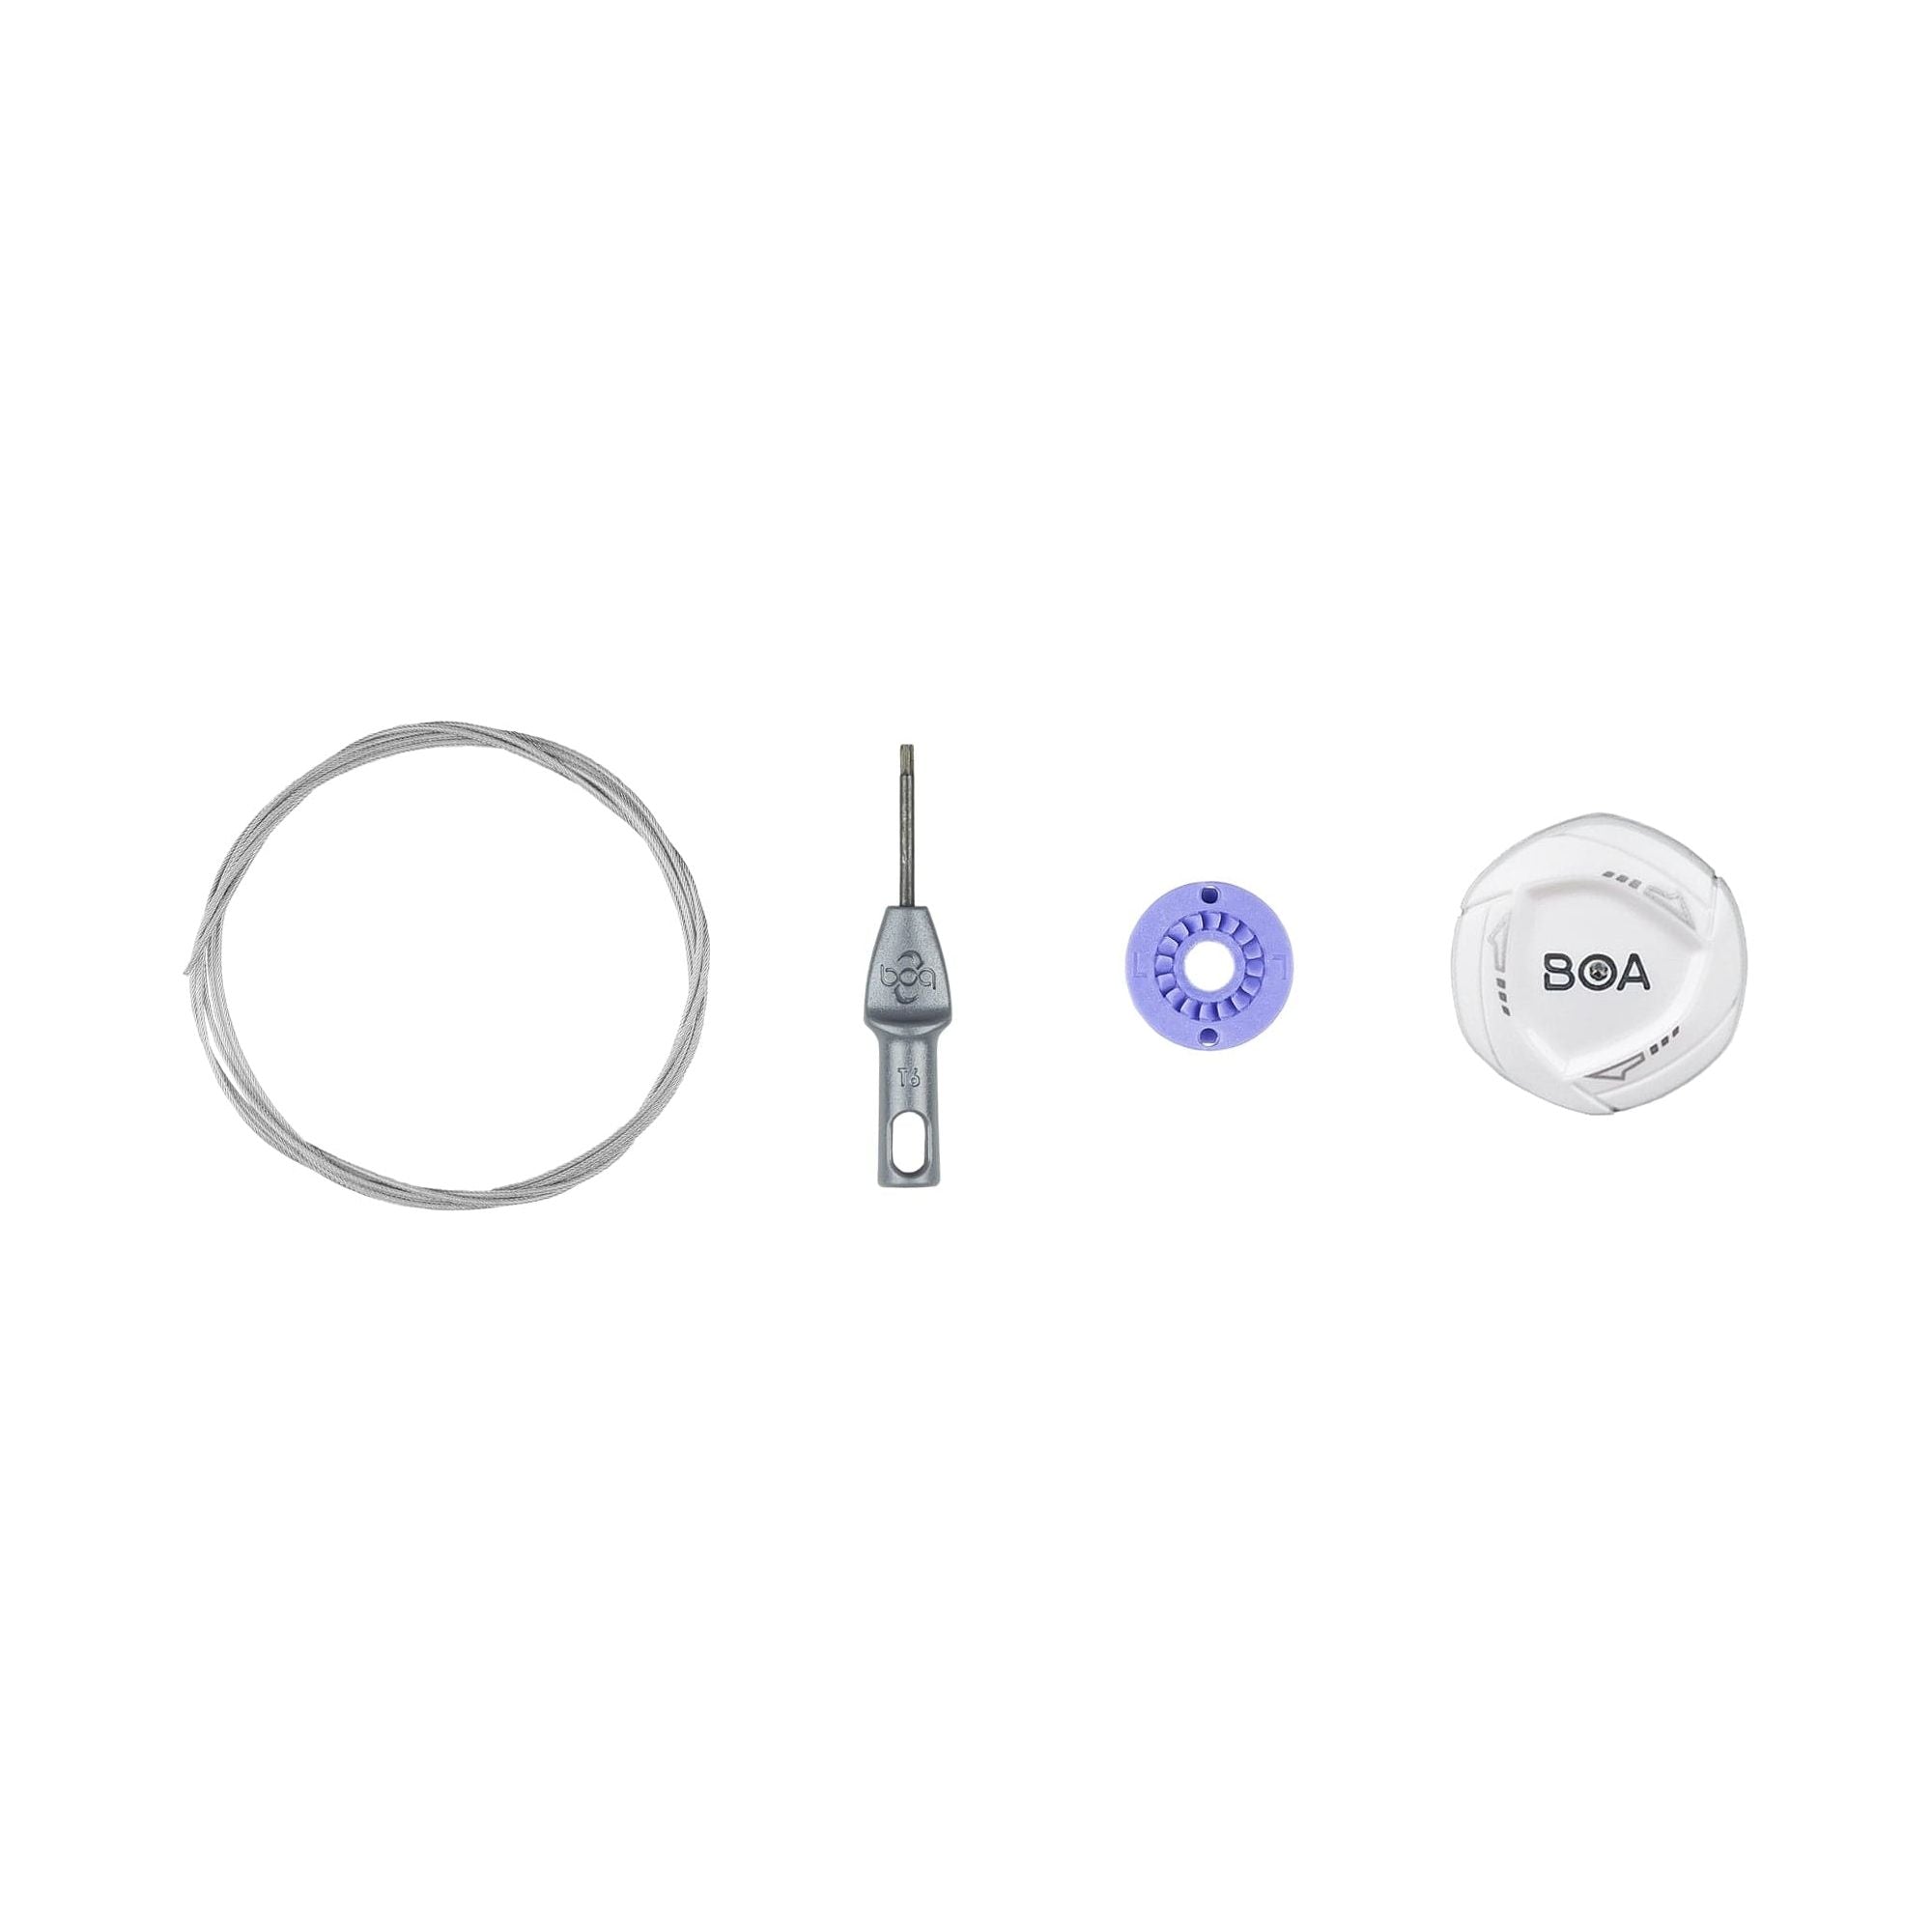 BOA Shoe Replacement IP1 Left Dial Kit